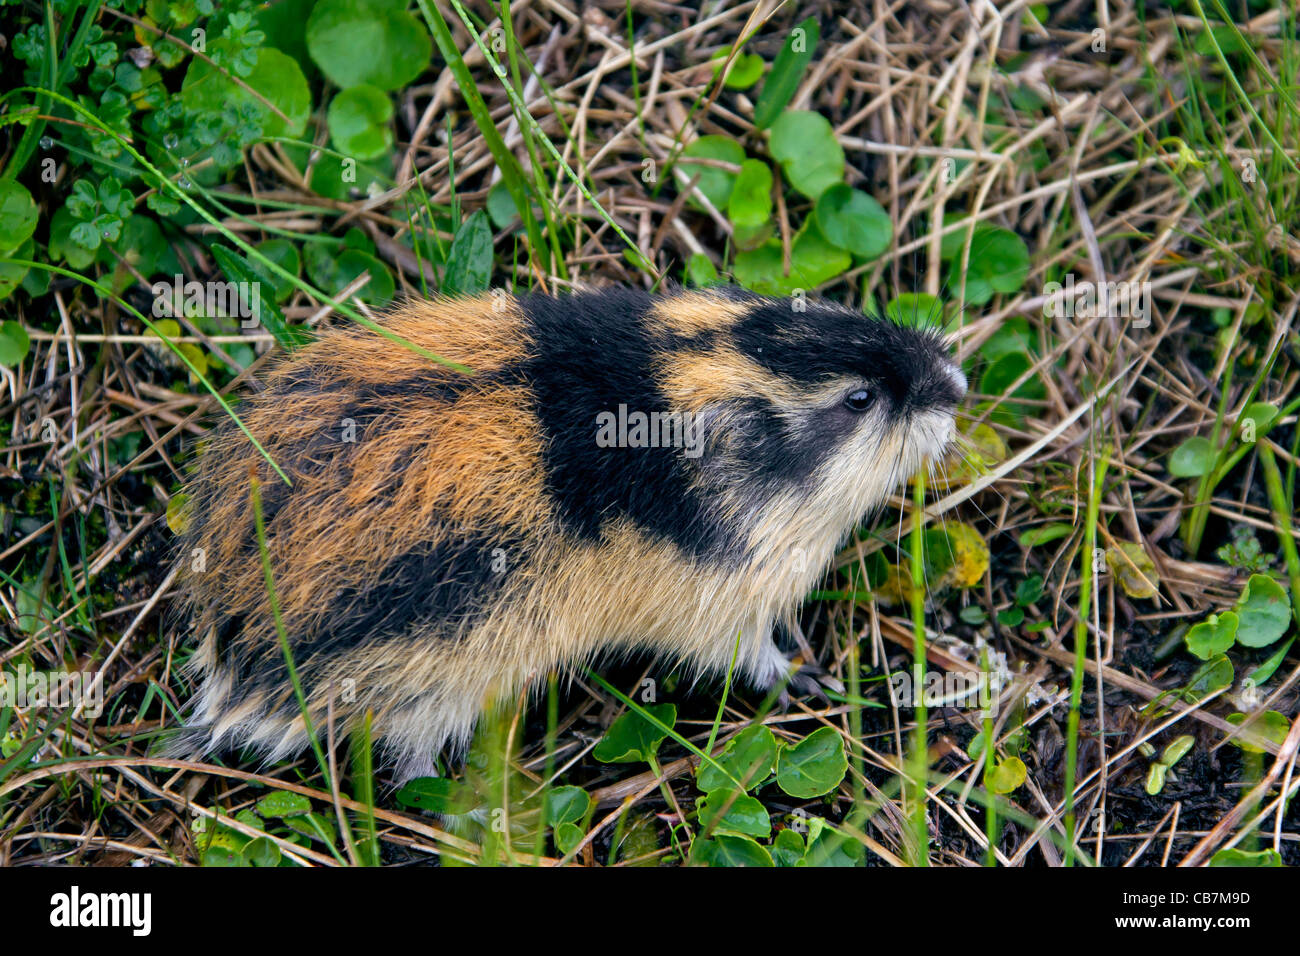 An ode to the lemming: the adorable rodent you do want running